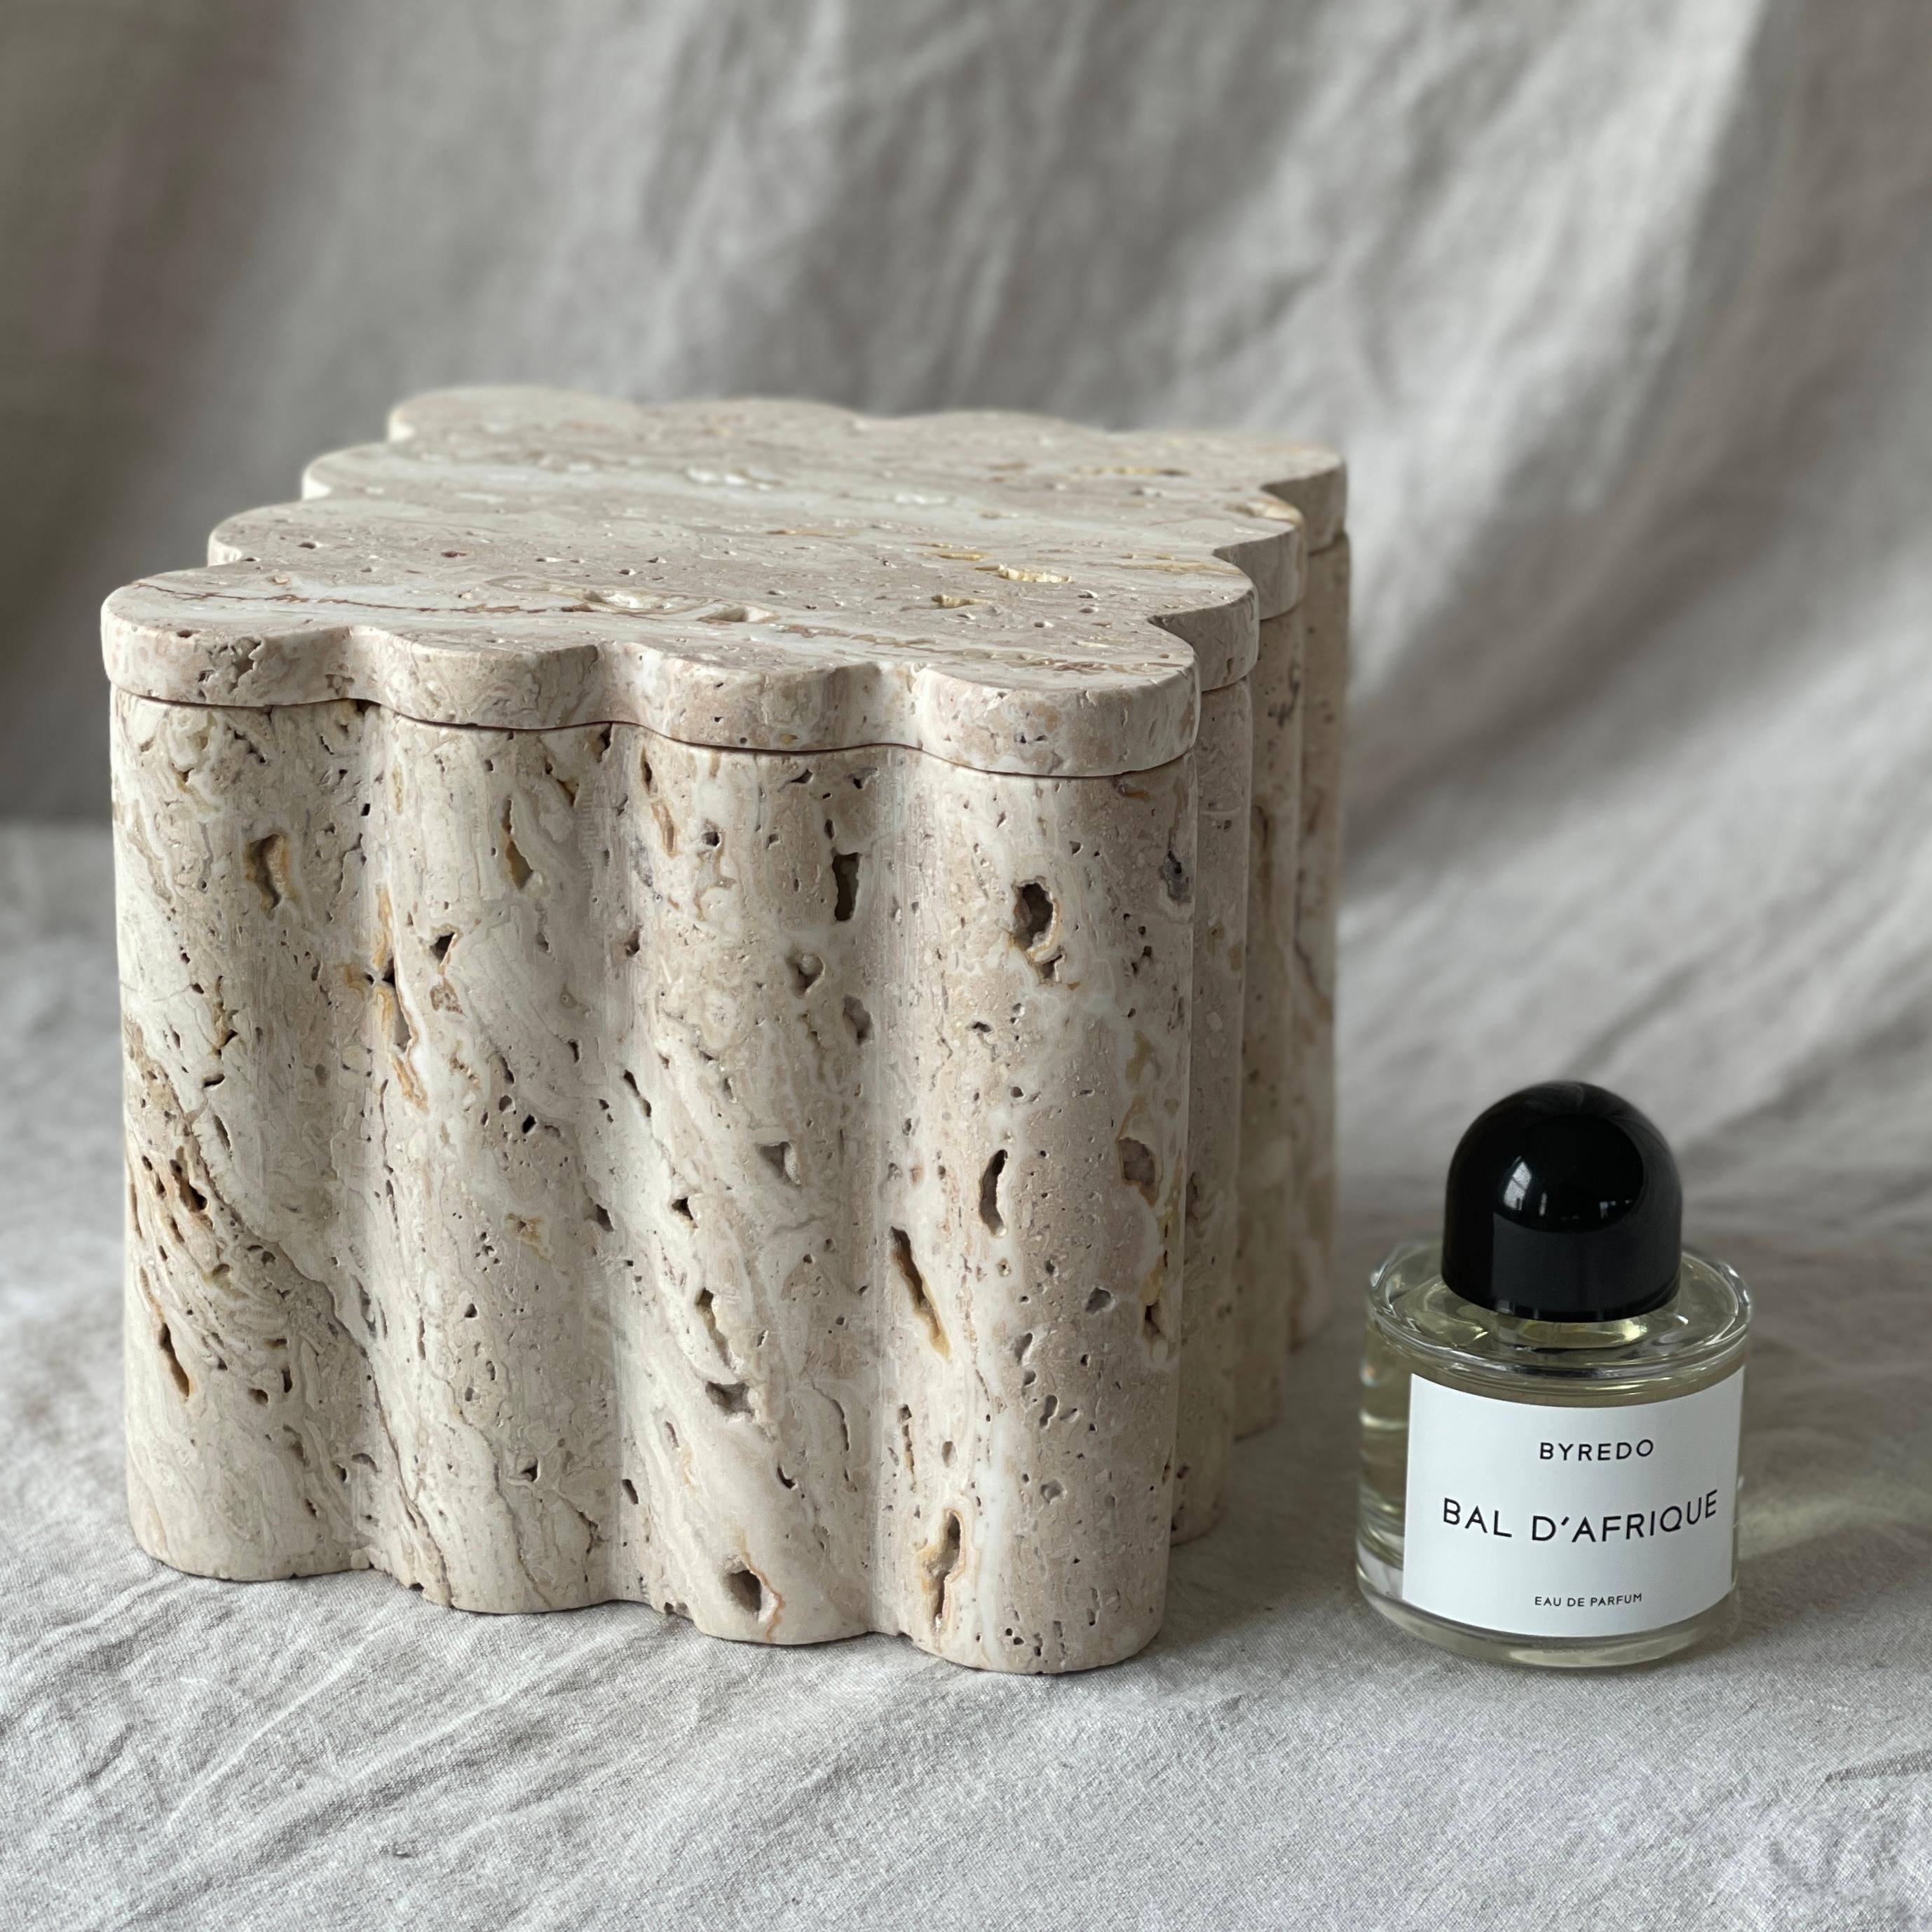 XXL Box is a limited edition functional object d'art carved from a single cube of Travertine.  Hand-finished by a growing artisan atelier in Rajasthan, India it is produced exclusively by Anastasio Home. This lidded box is a jumbo version of the